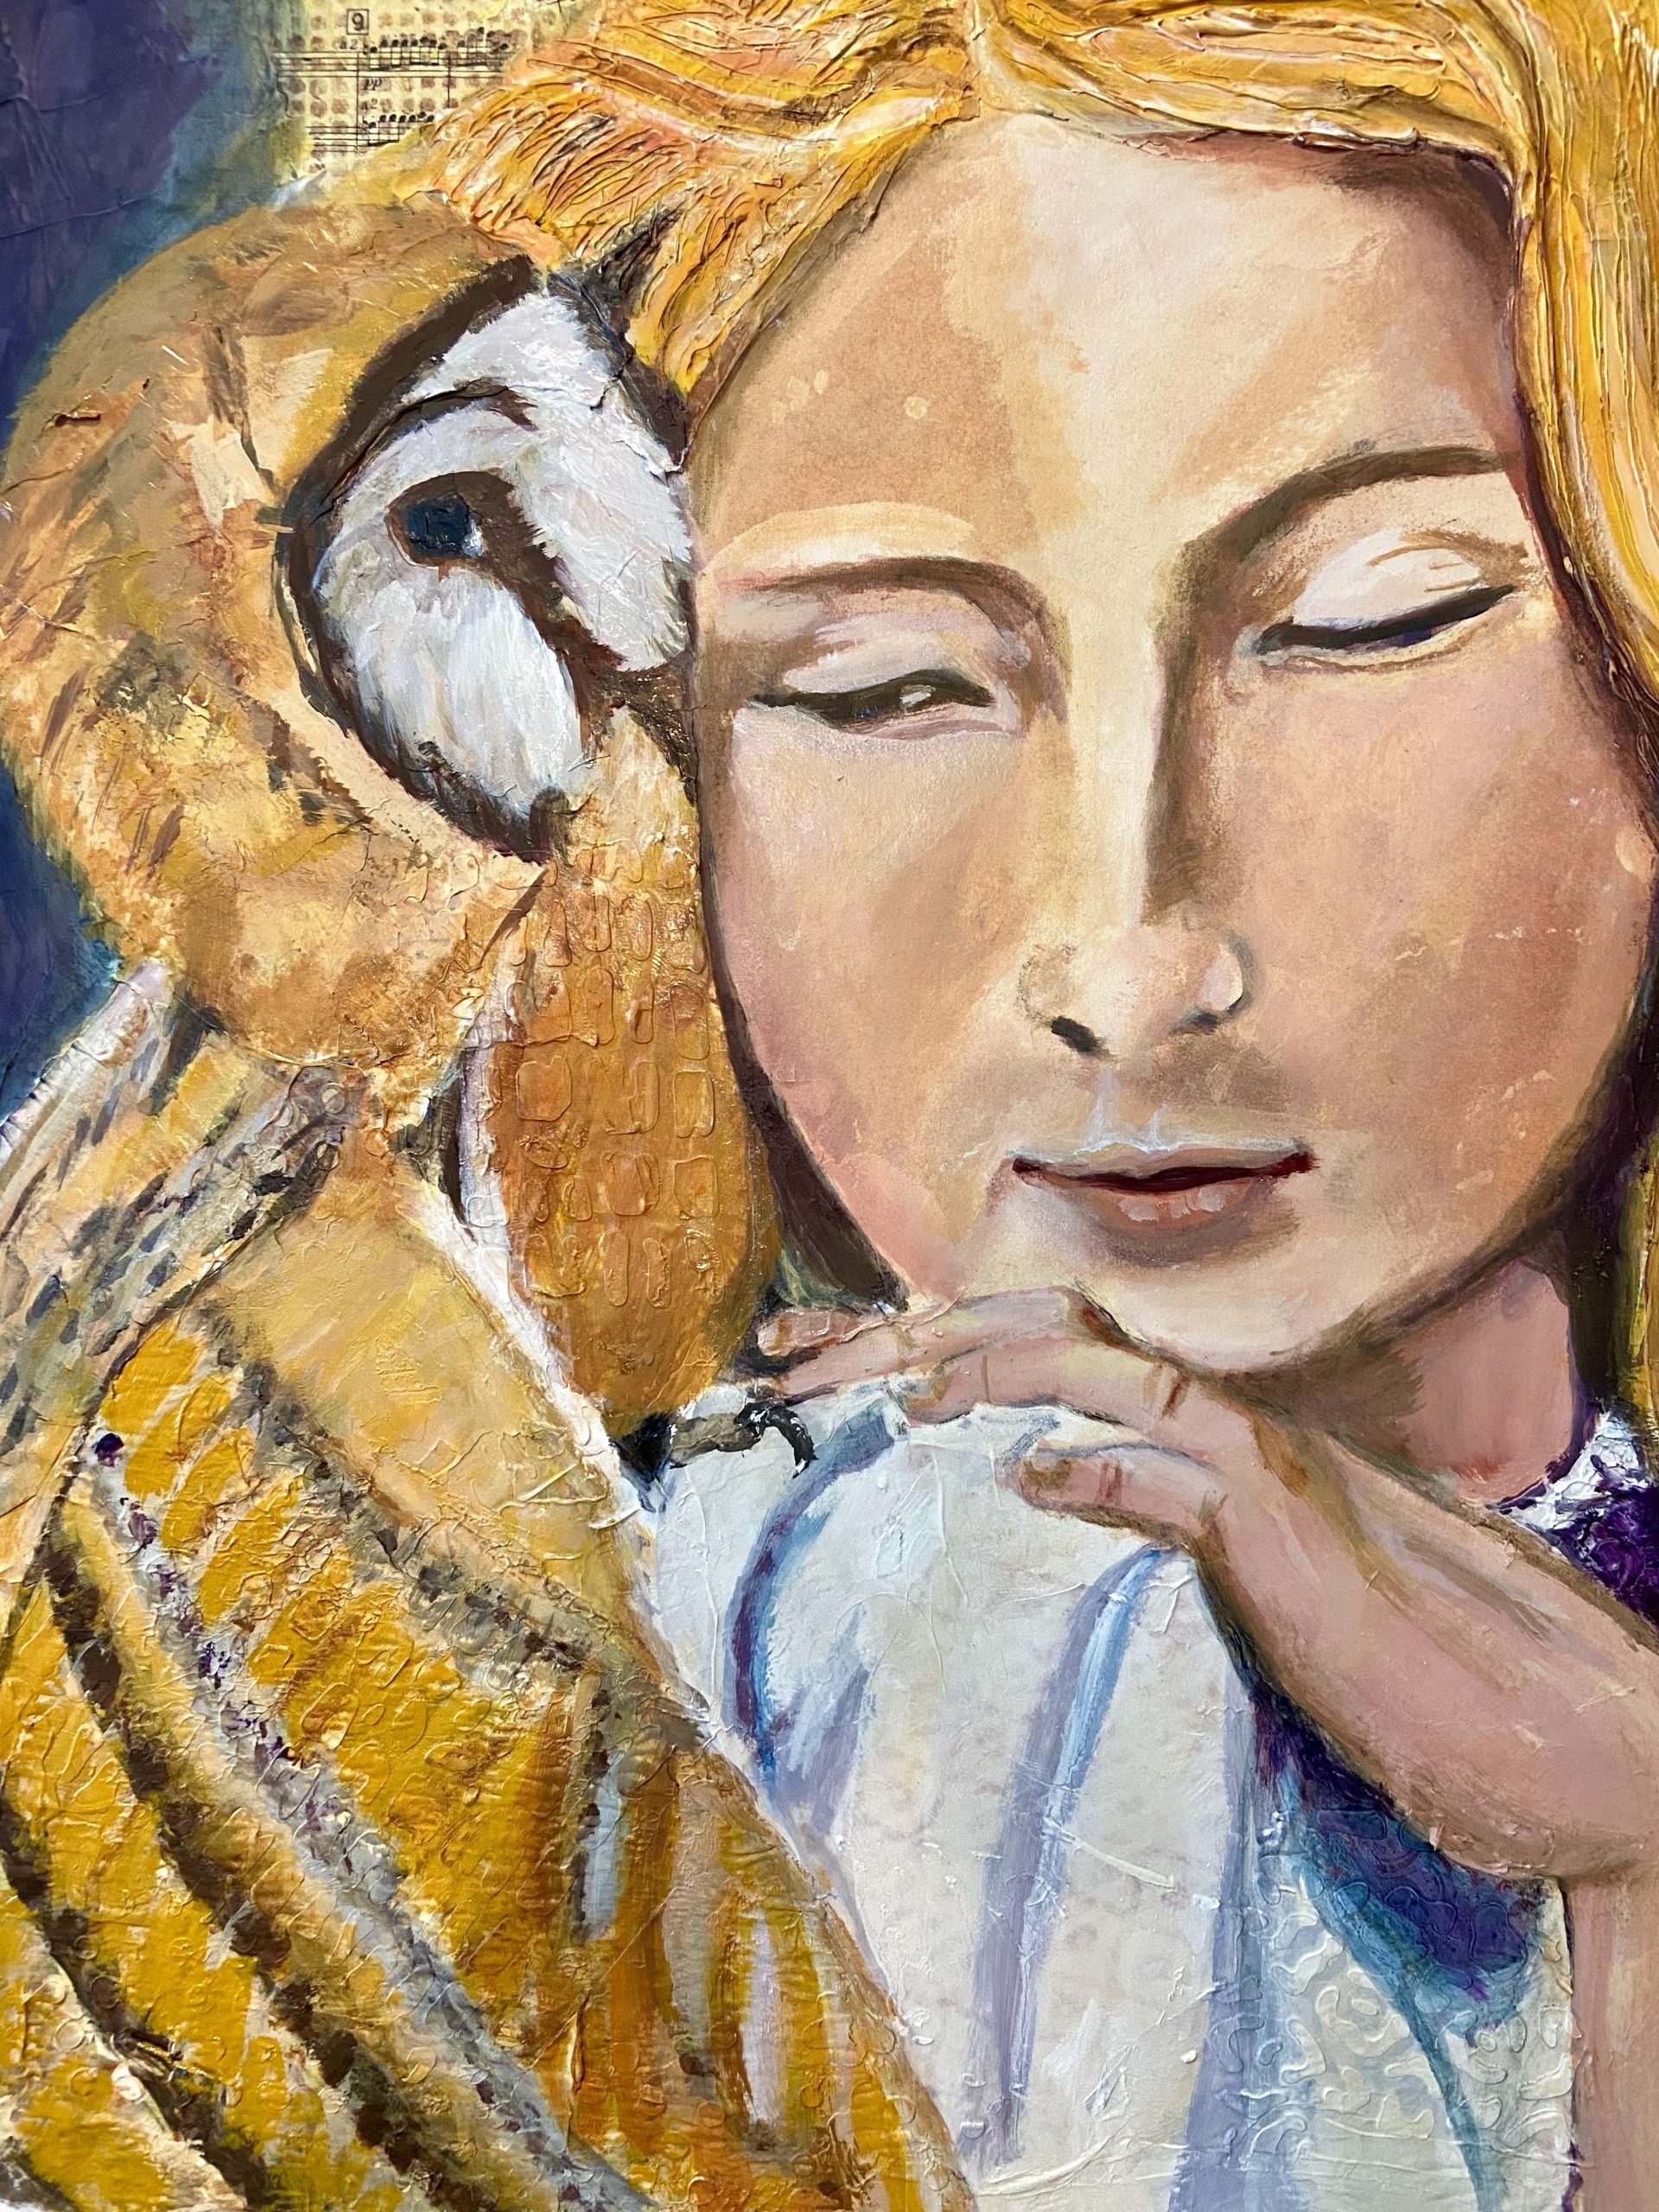 Mixed media painting of a girl with an owl on her shoulder using collage, texture paste, acrylic paint, and oil paint.